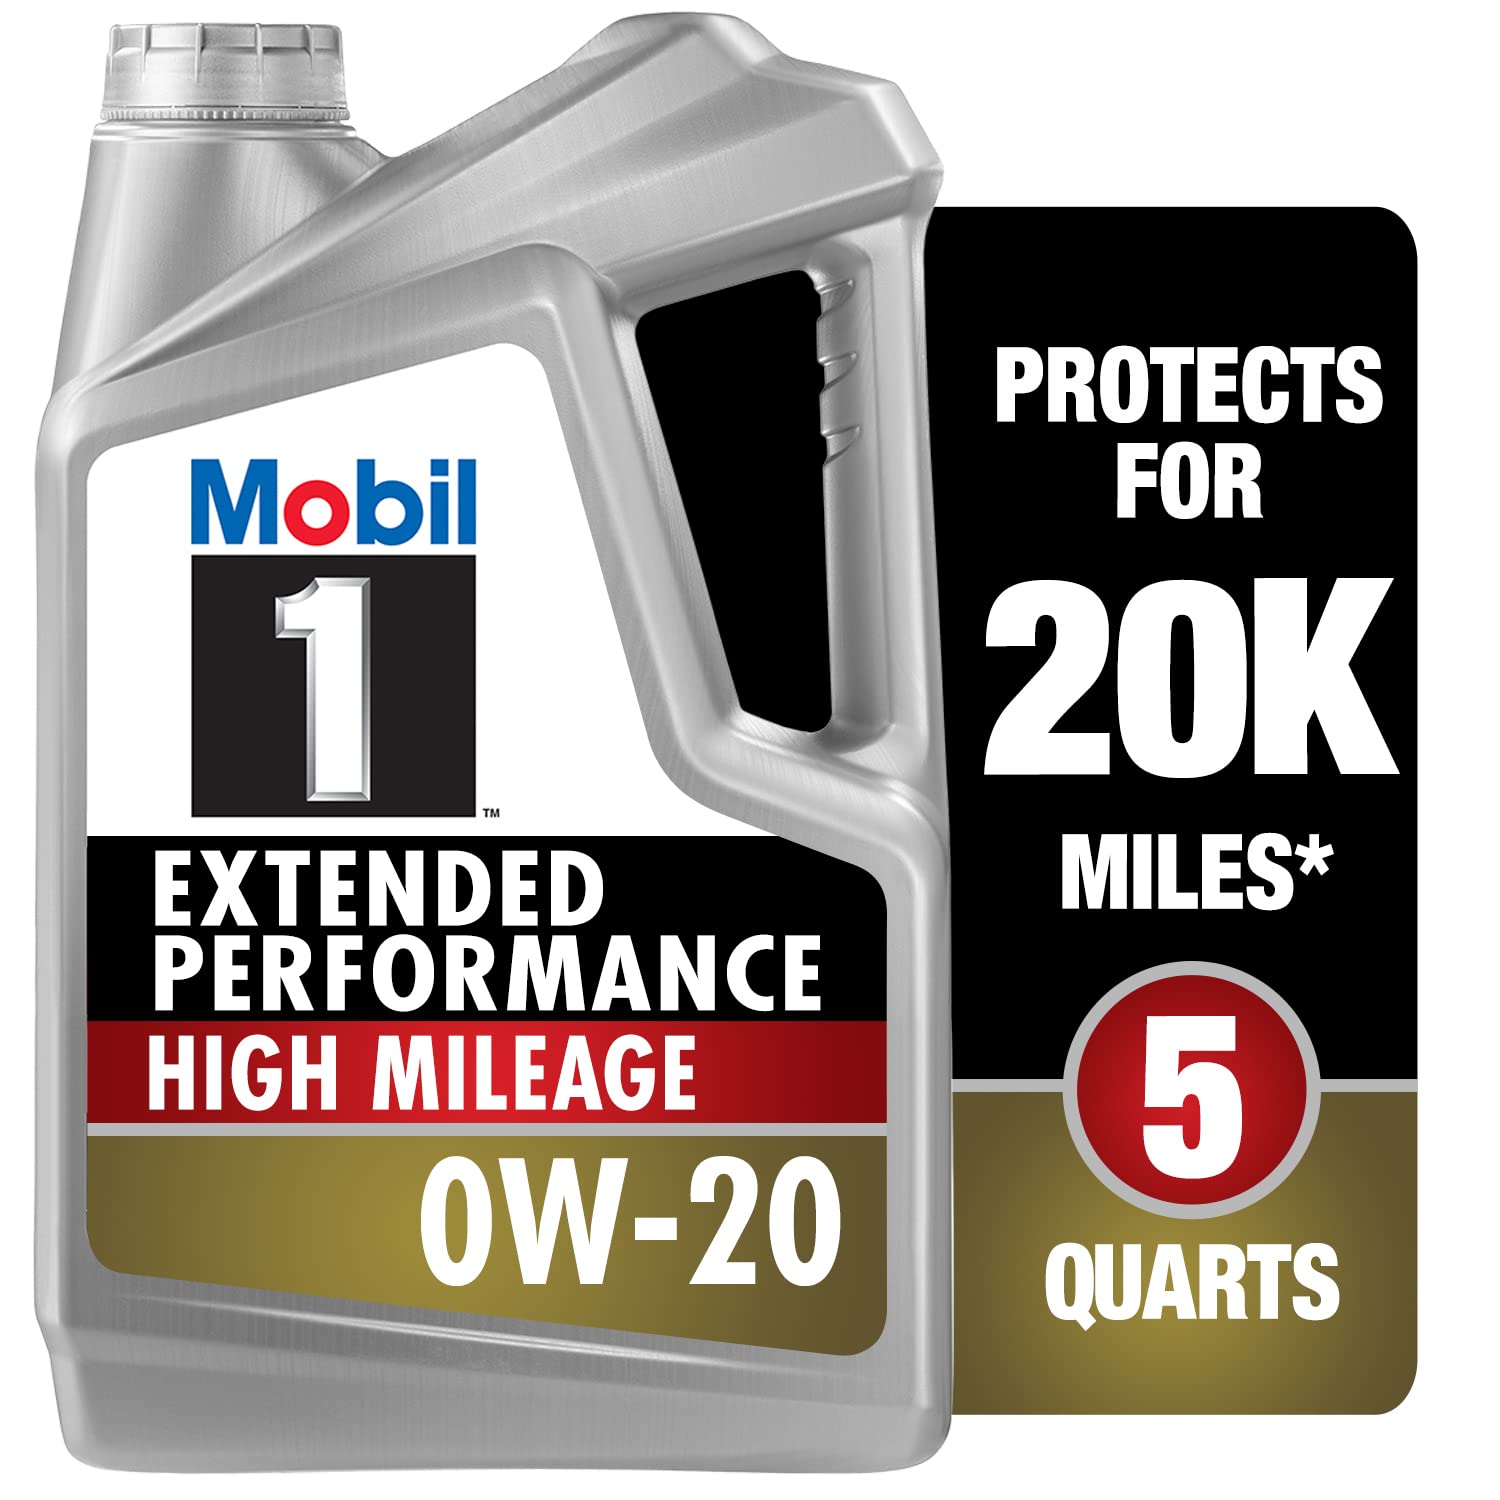 Mobil 1 High Mileage vs Extended Performance